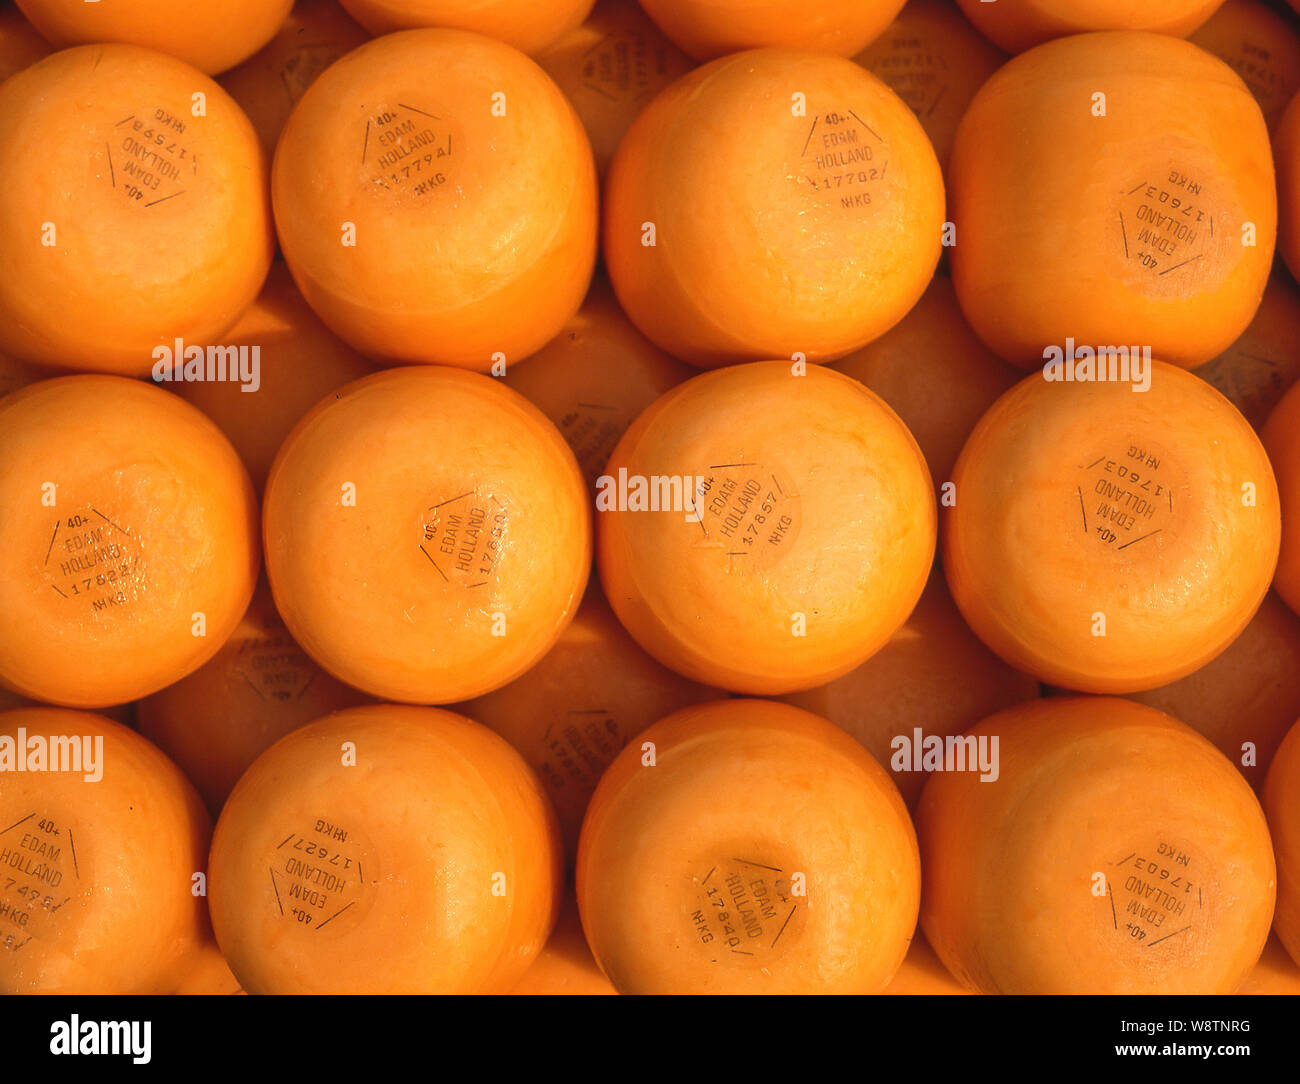 Waxed cylinders of Edam cheese, Edam, North Holland (Noord-Holland), Kingdom of the Netherlands Stock Photo